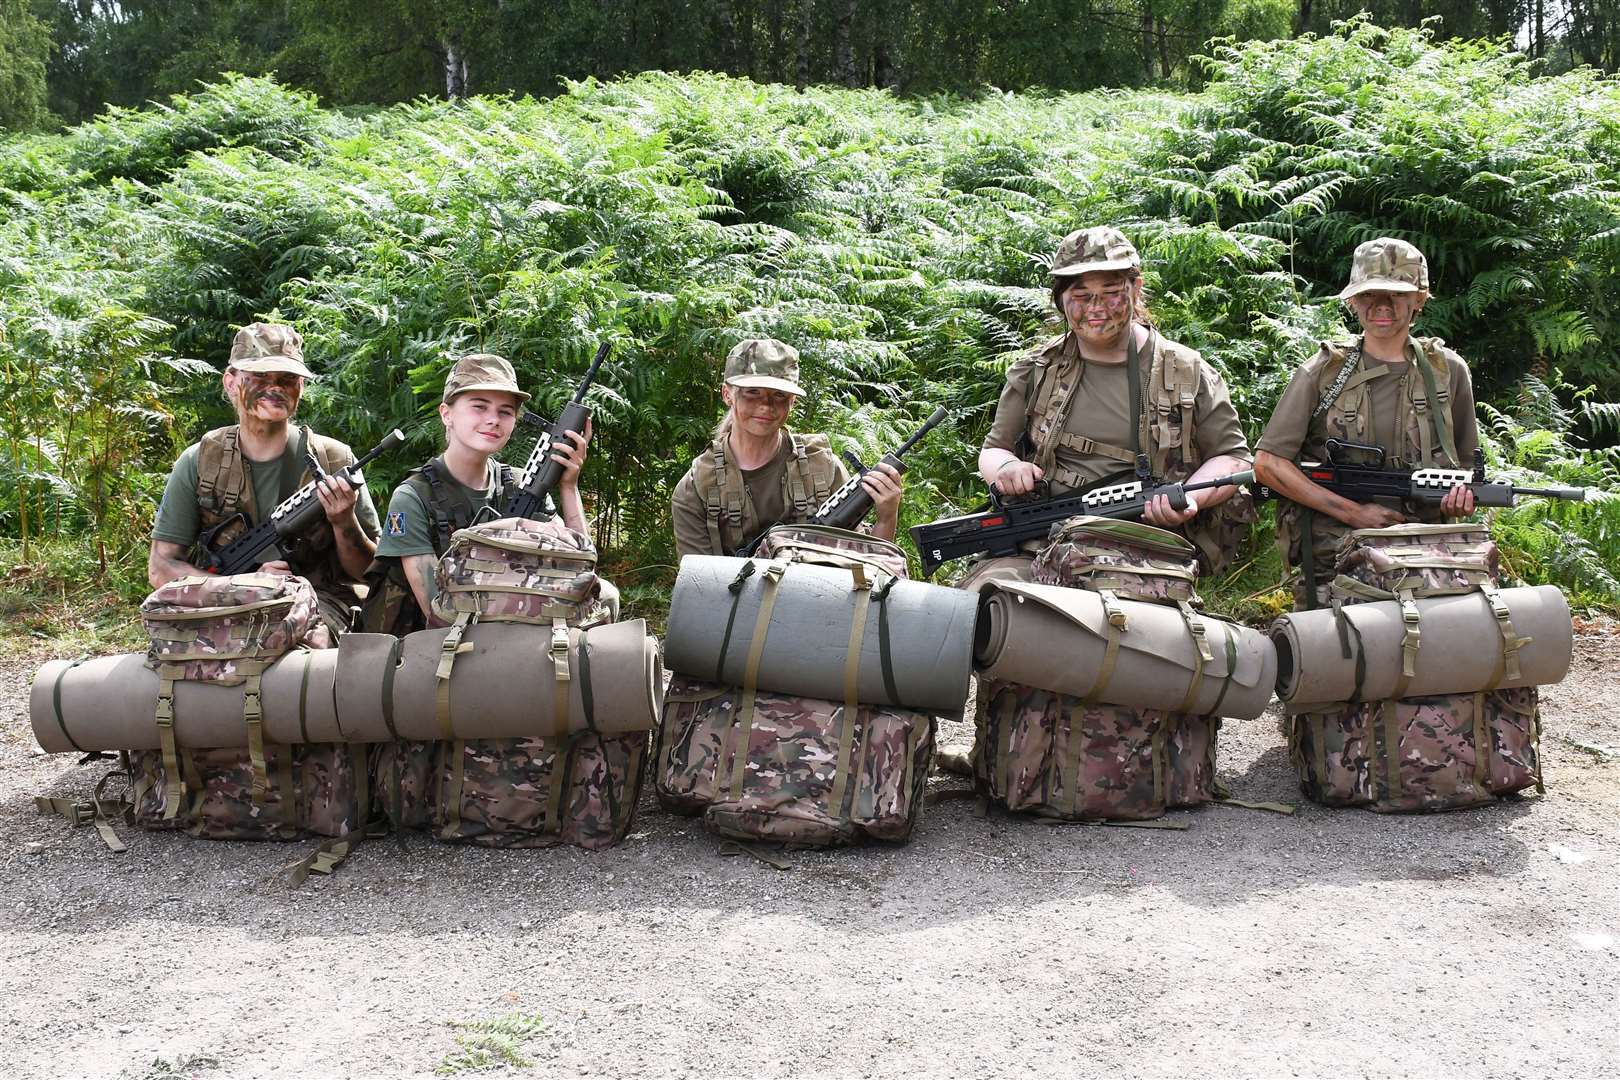 Enjoying their fieldcraft exercise are Buckie cadets (from left) Charlie Singer, Kate Sanderson, Micha Shields, Peaches Milne and Cadet Isla Hutchieson. Picture: ACF